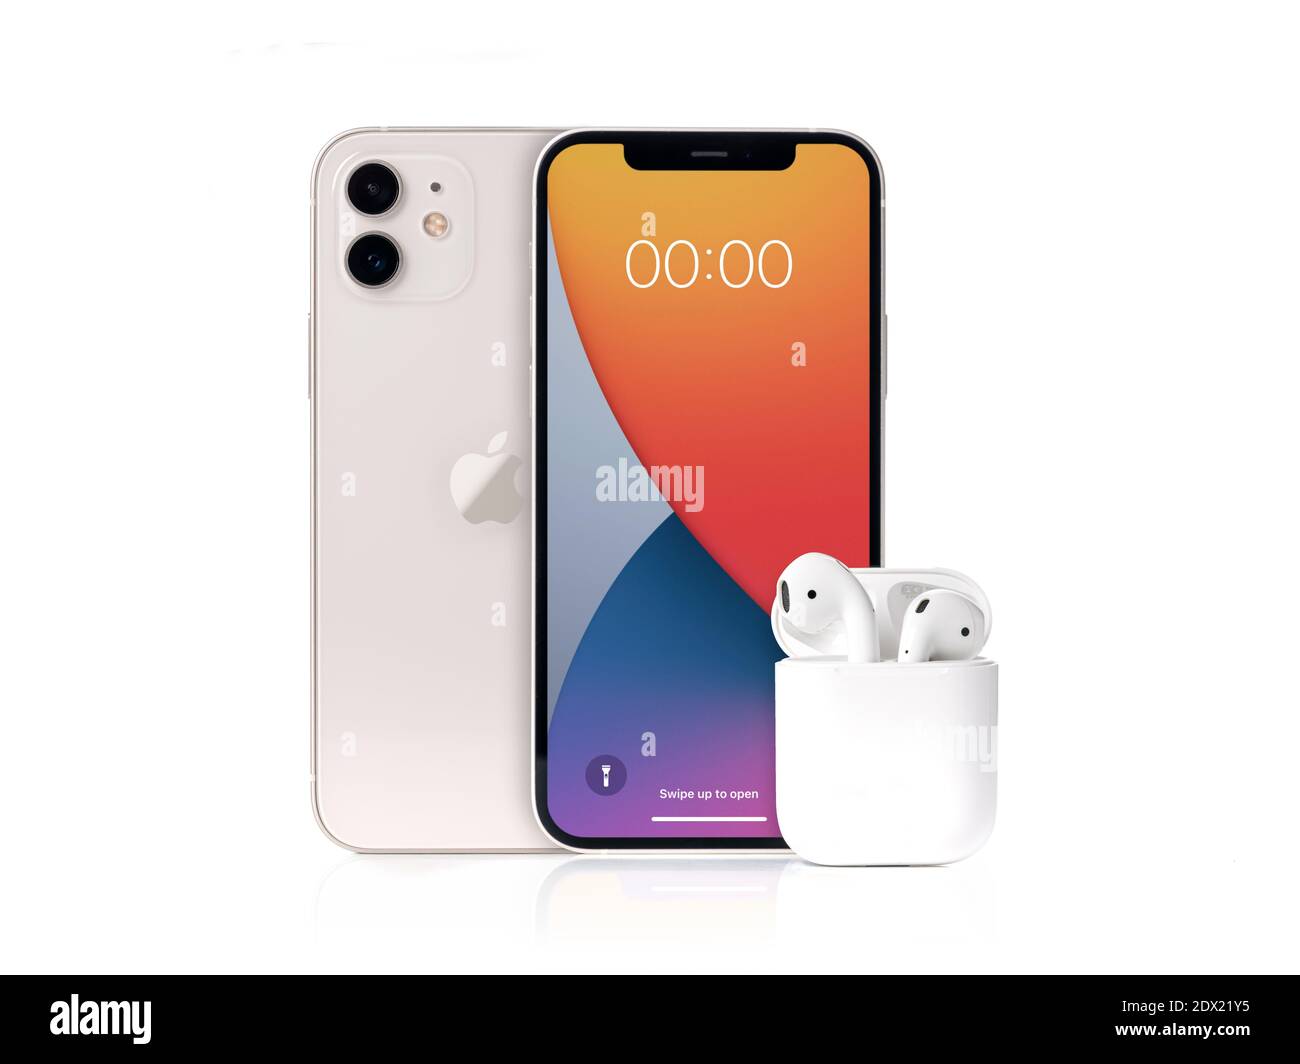 Antalya, Turkey - December 23, 2020: Front and Back view of new iPhone 12 white smartphone and Apple Airpods 2 headphone Stock Photo